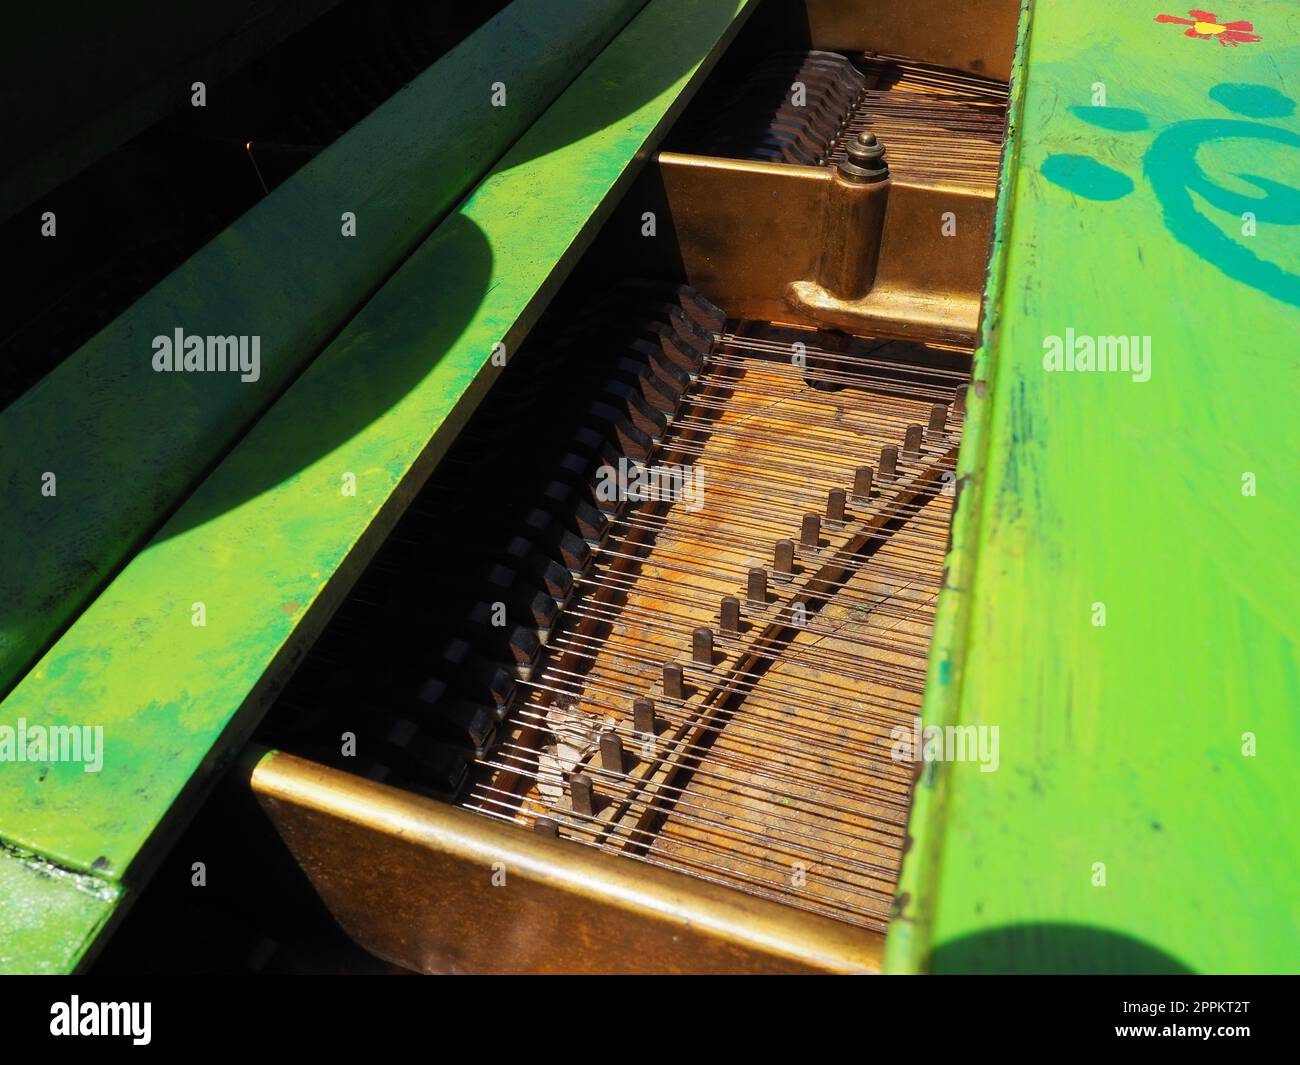 Strings, soundboard and piano mechanics. Piano on the street. Piano painted green. Performance of a piece of music. Street concert on a summer sunny day. Stock Photo